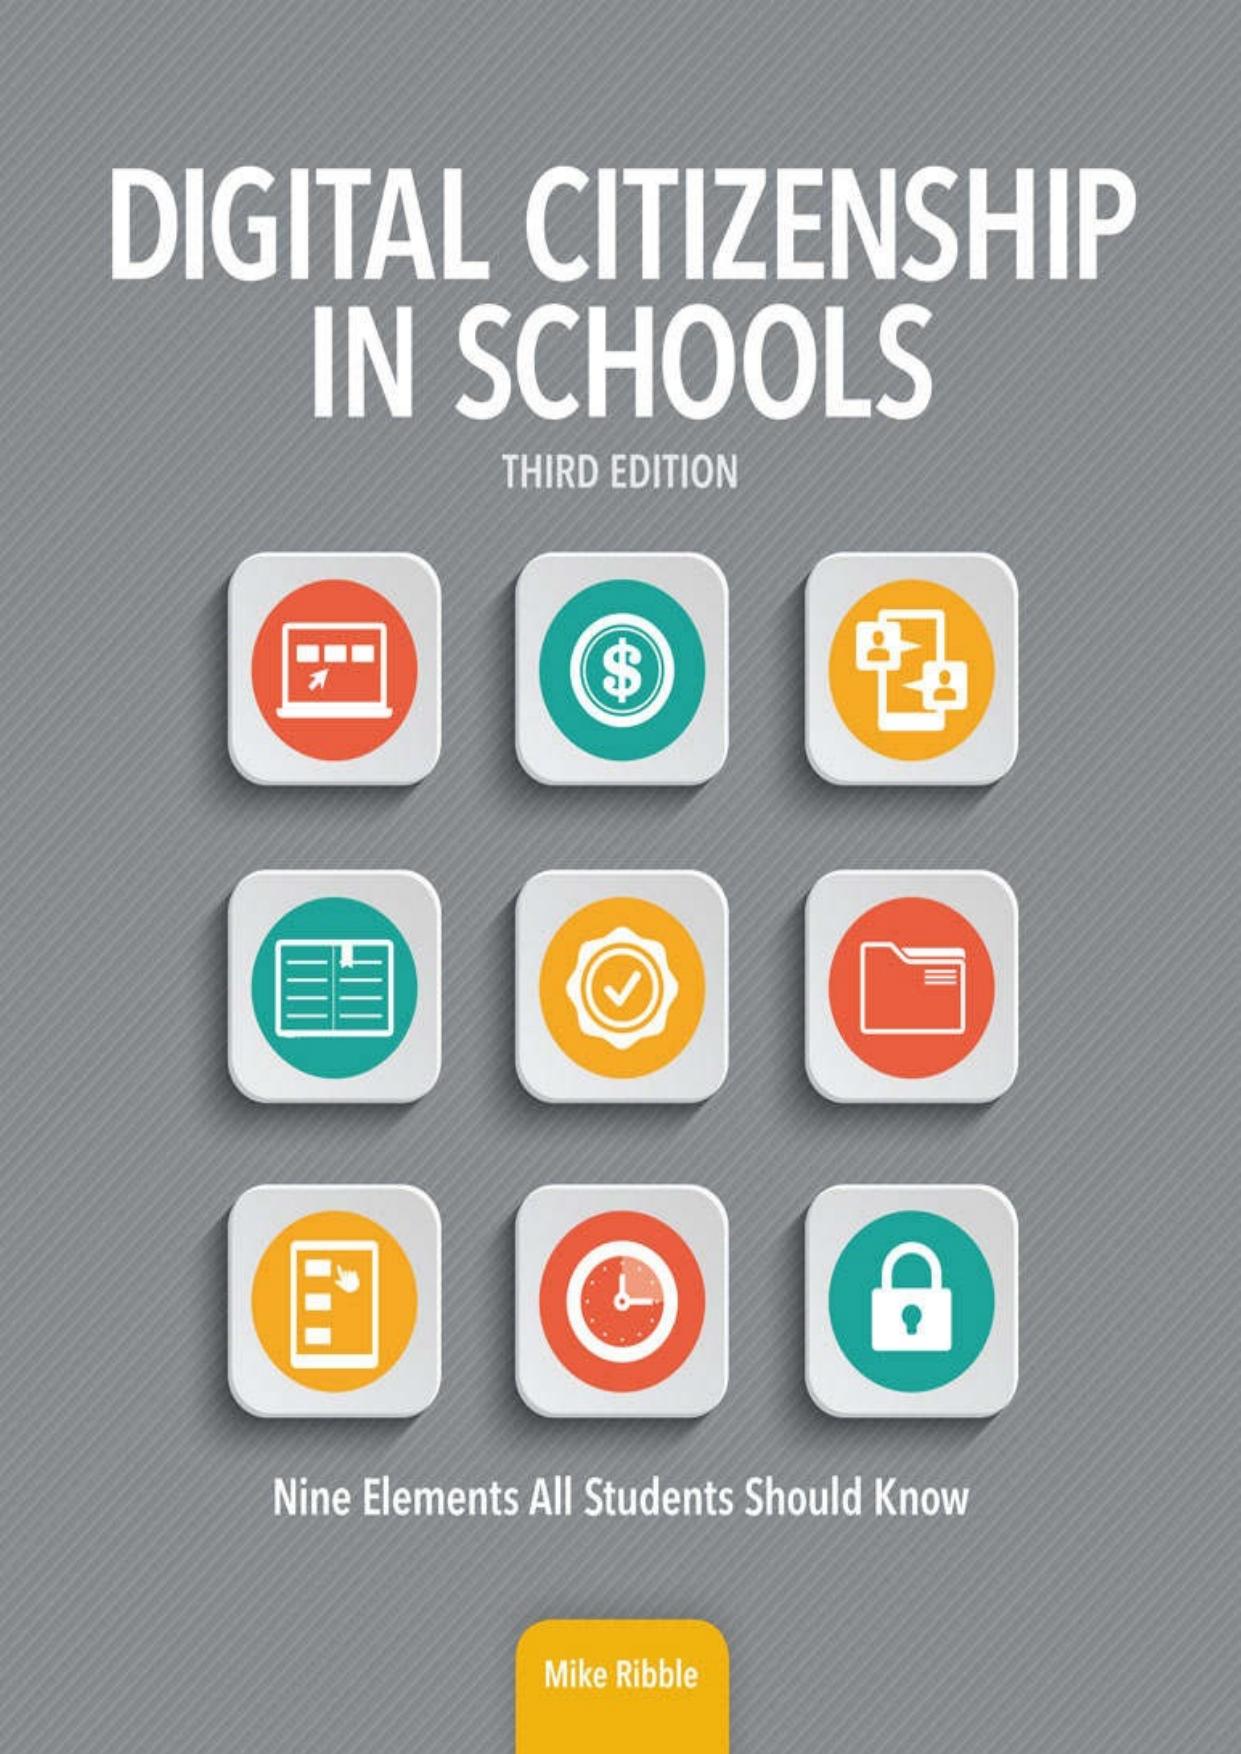 Digital Citizenship in Schools: Nine Elements All Students Should Know by Mike Ribble